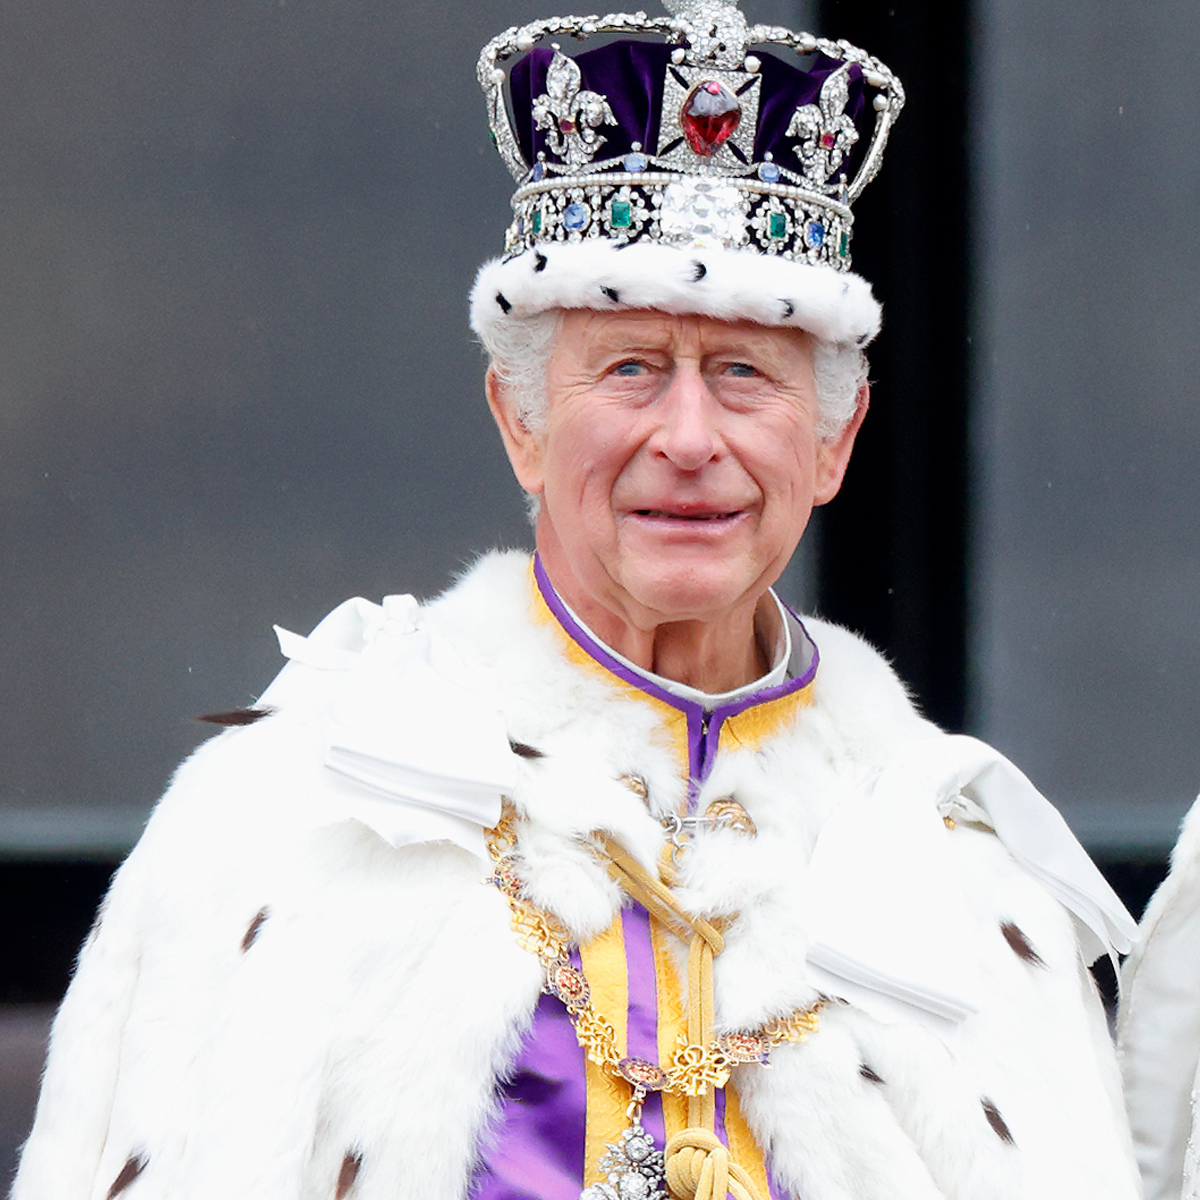 Coronation day: King Charles III, Queen Camilla crowned